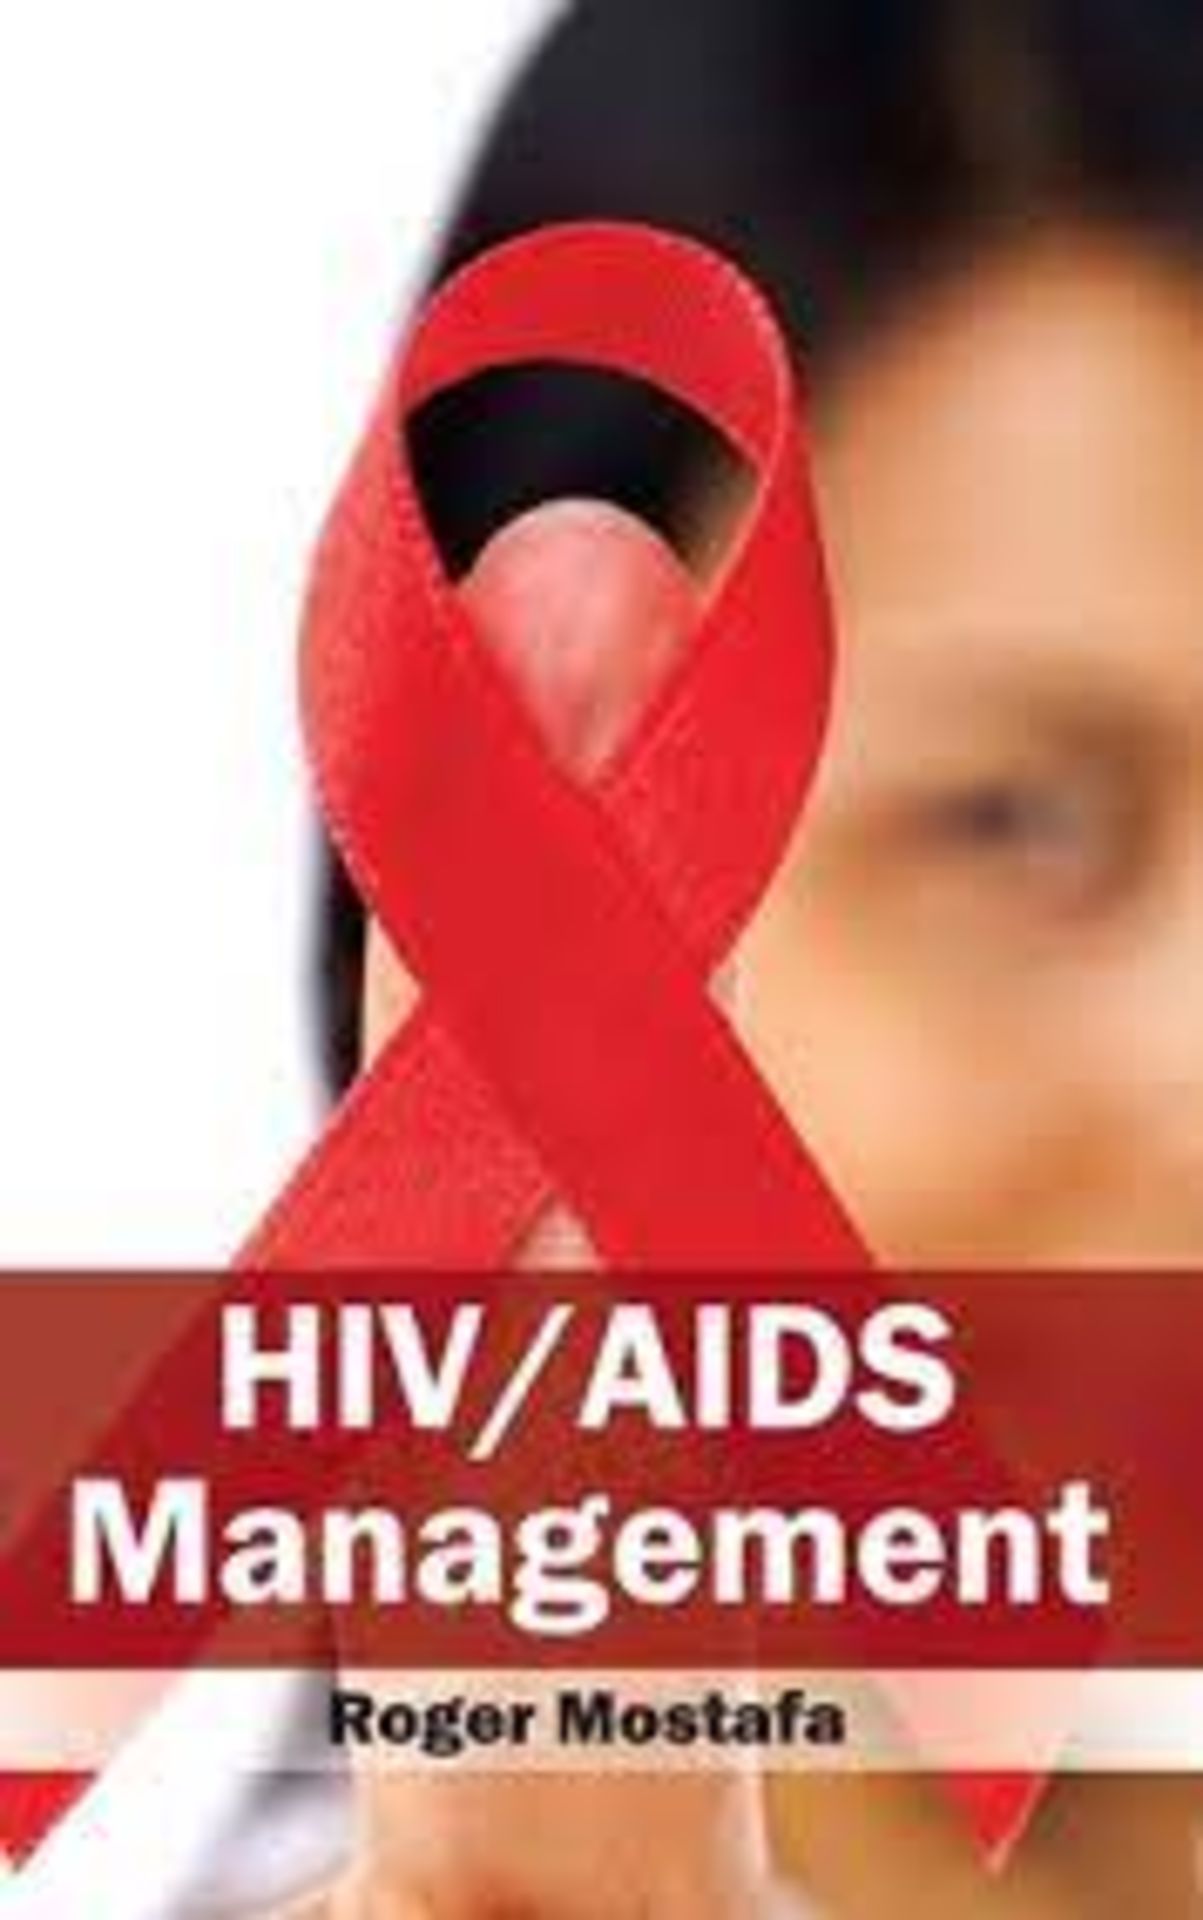 RRP £1679 (Approx. Count 27)(B53) spW50G9573w 1x HIV/AIDS Management 1x The Library, Vol. 3 (Classic